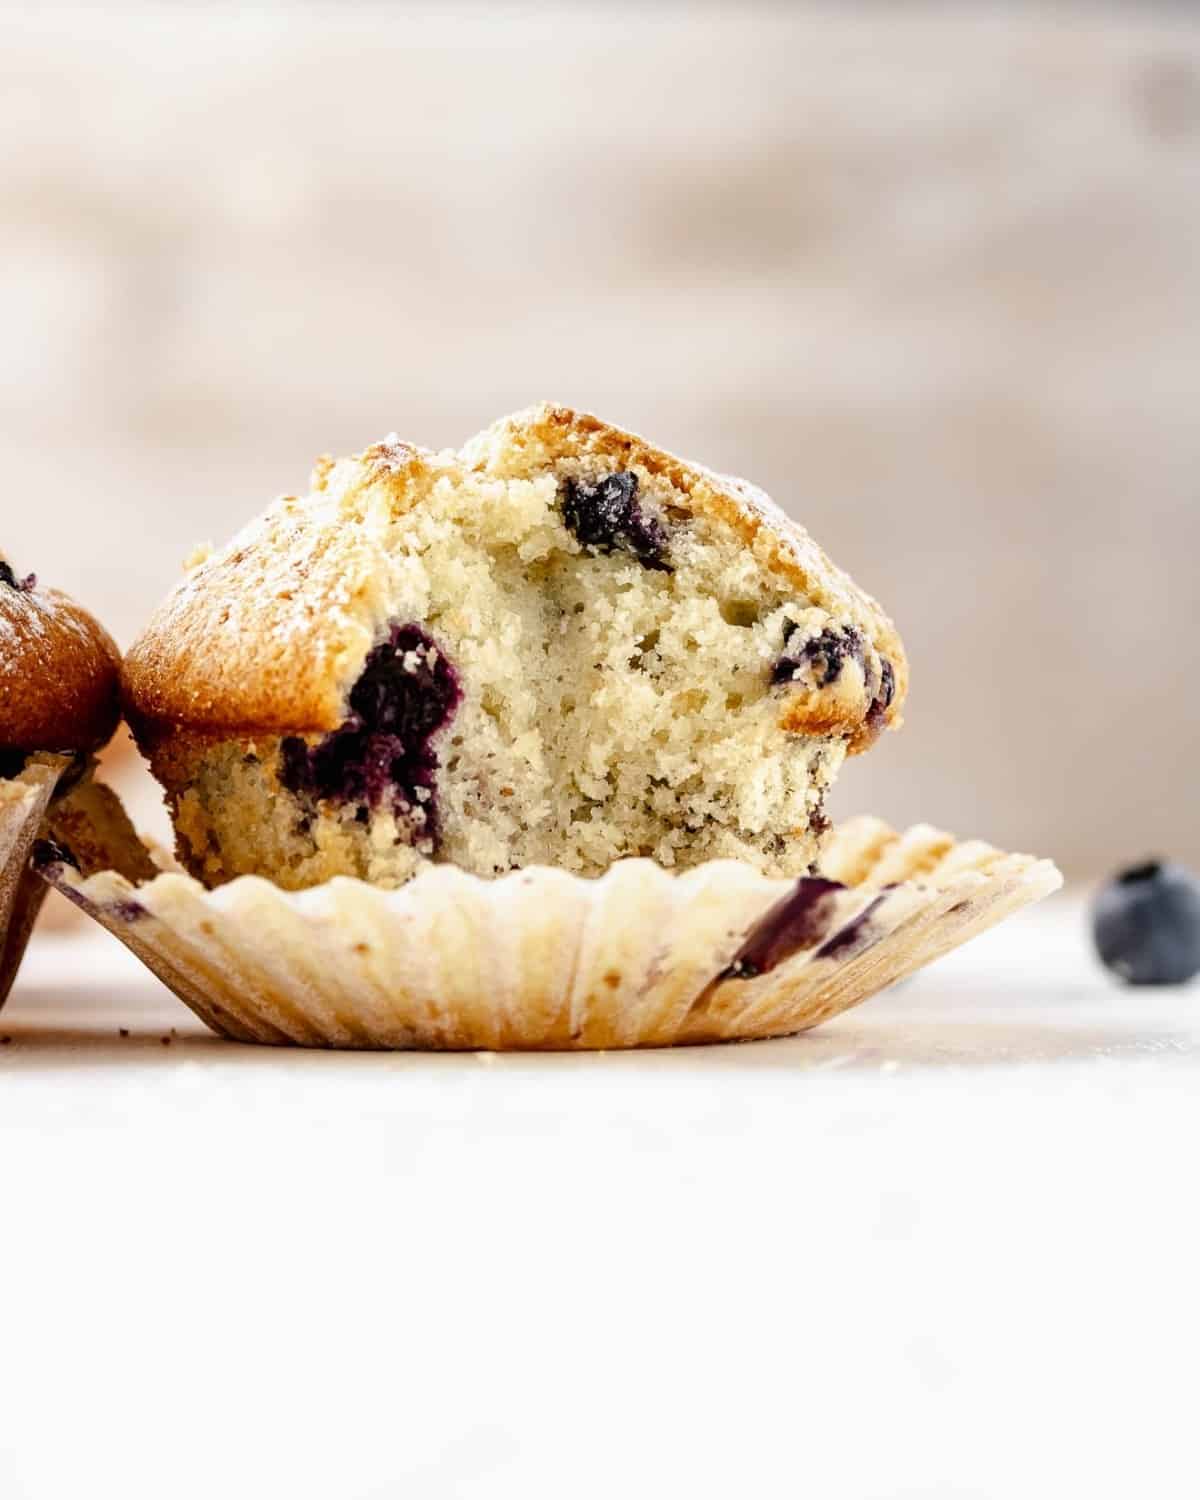 Close-up of an open blueberry muffins over a table. Inside the muffin you can see the cooked blueberries